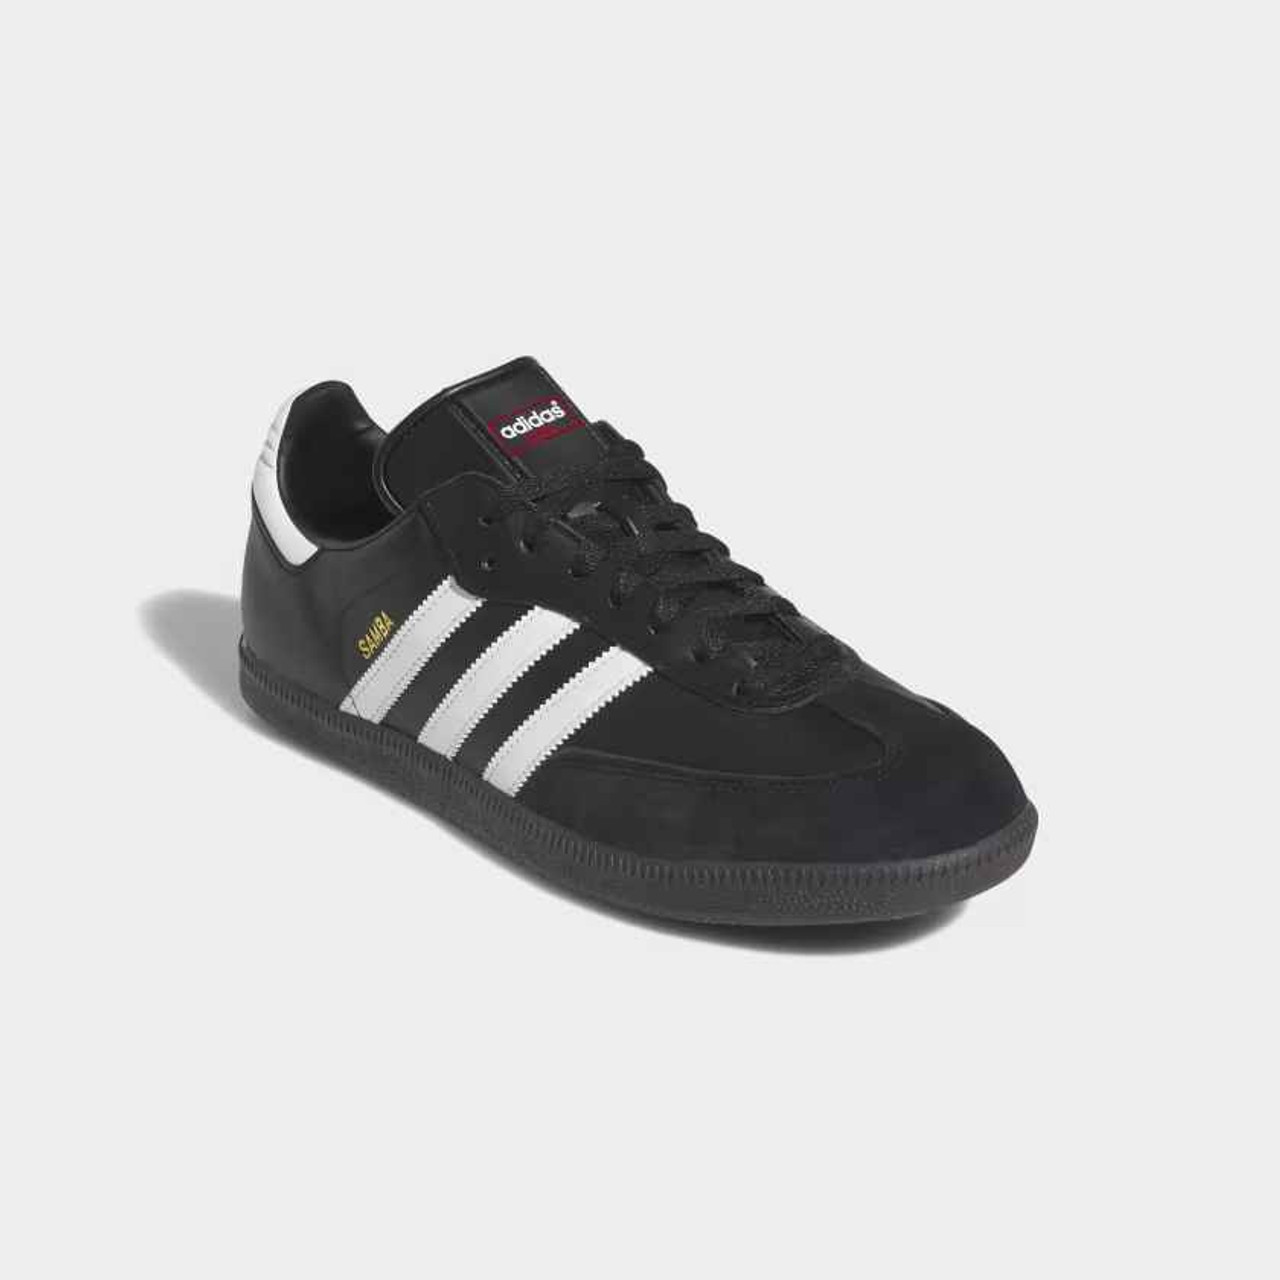 adidas Samba Classic Indoor Soccer Shoes Black/White - Chicago Soccer